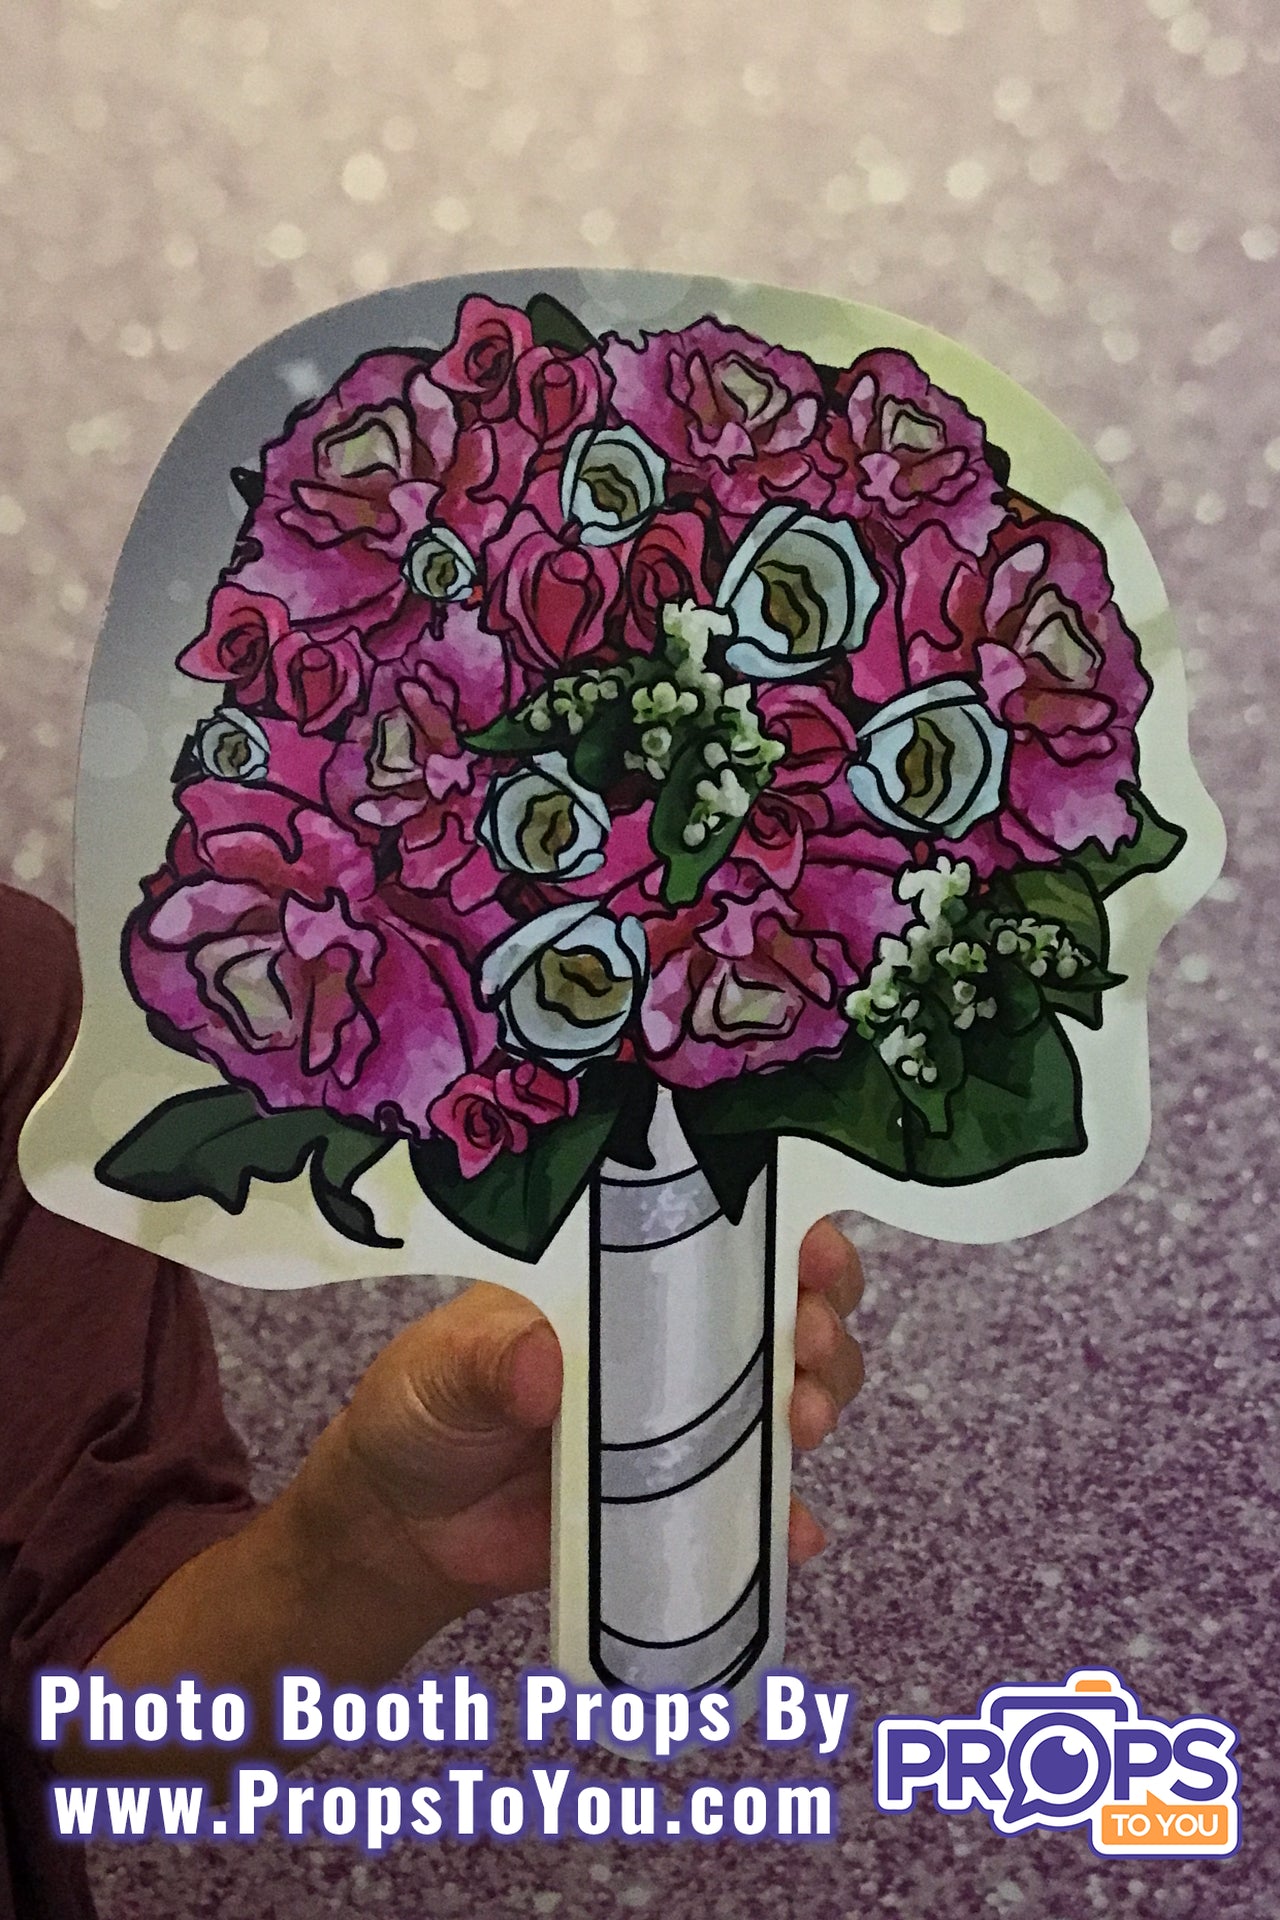 BUNDLE! Bouquets - 5 Double-Sided Photo Booth Props